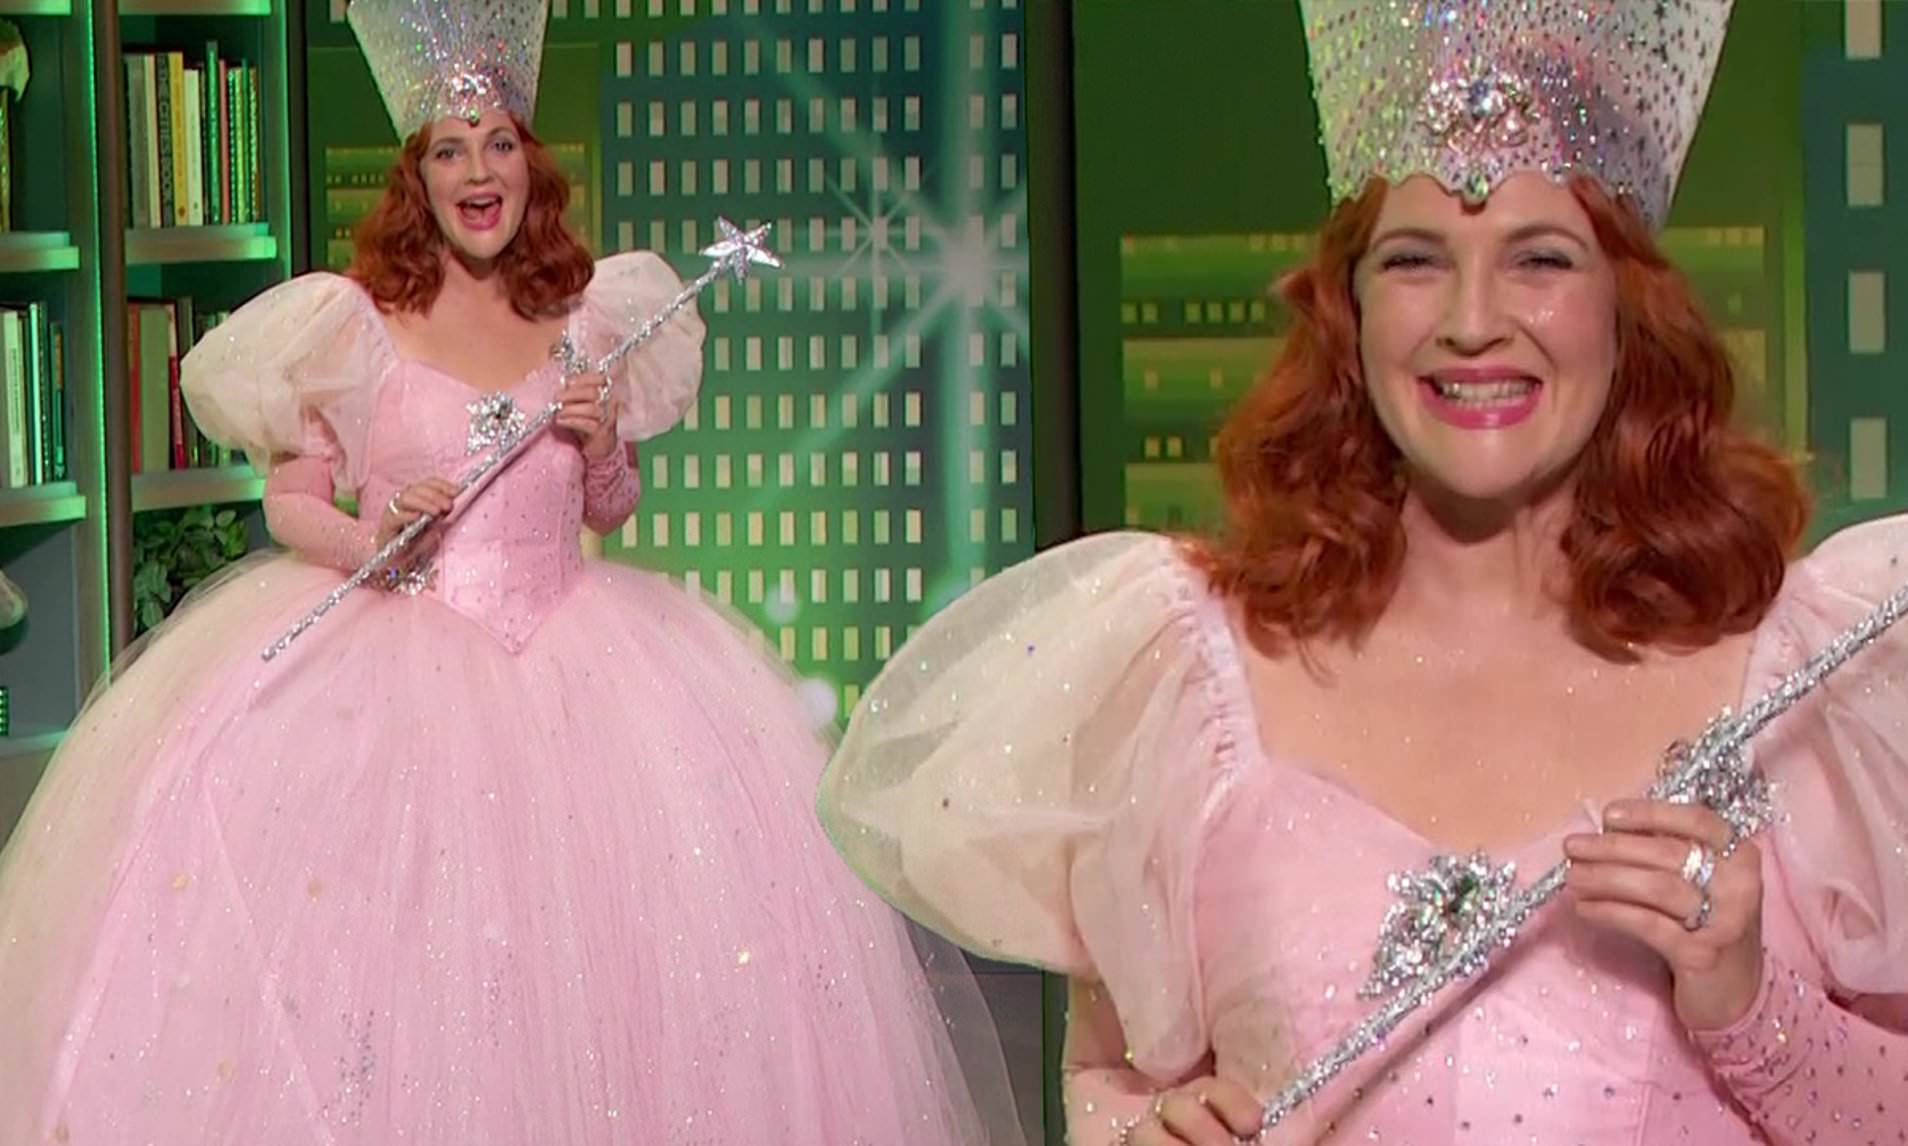 brandy frasier recommends pics of glinda the good witch pic